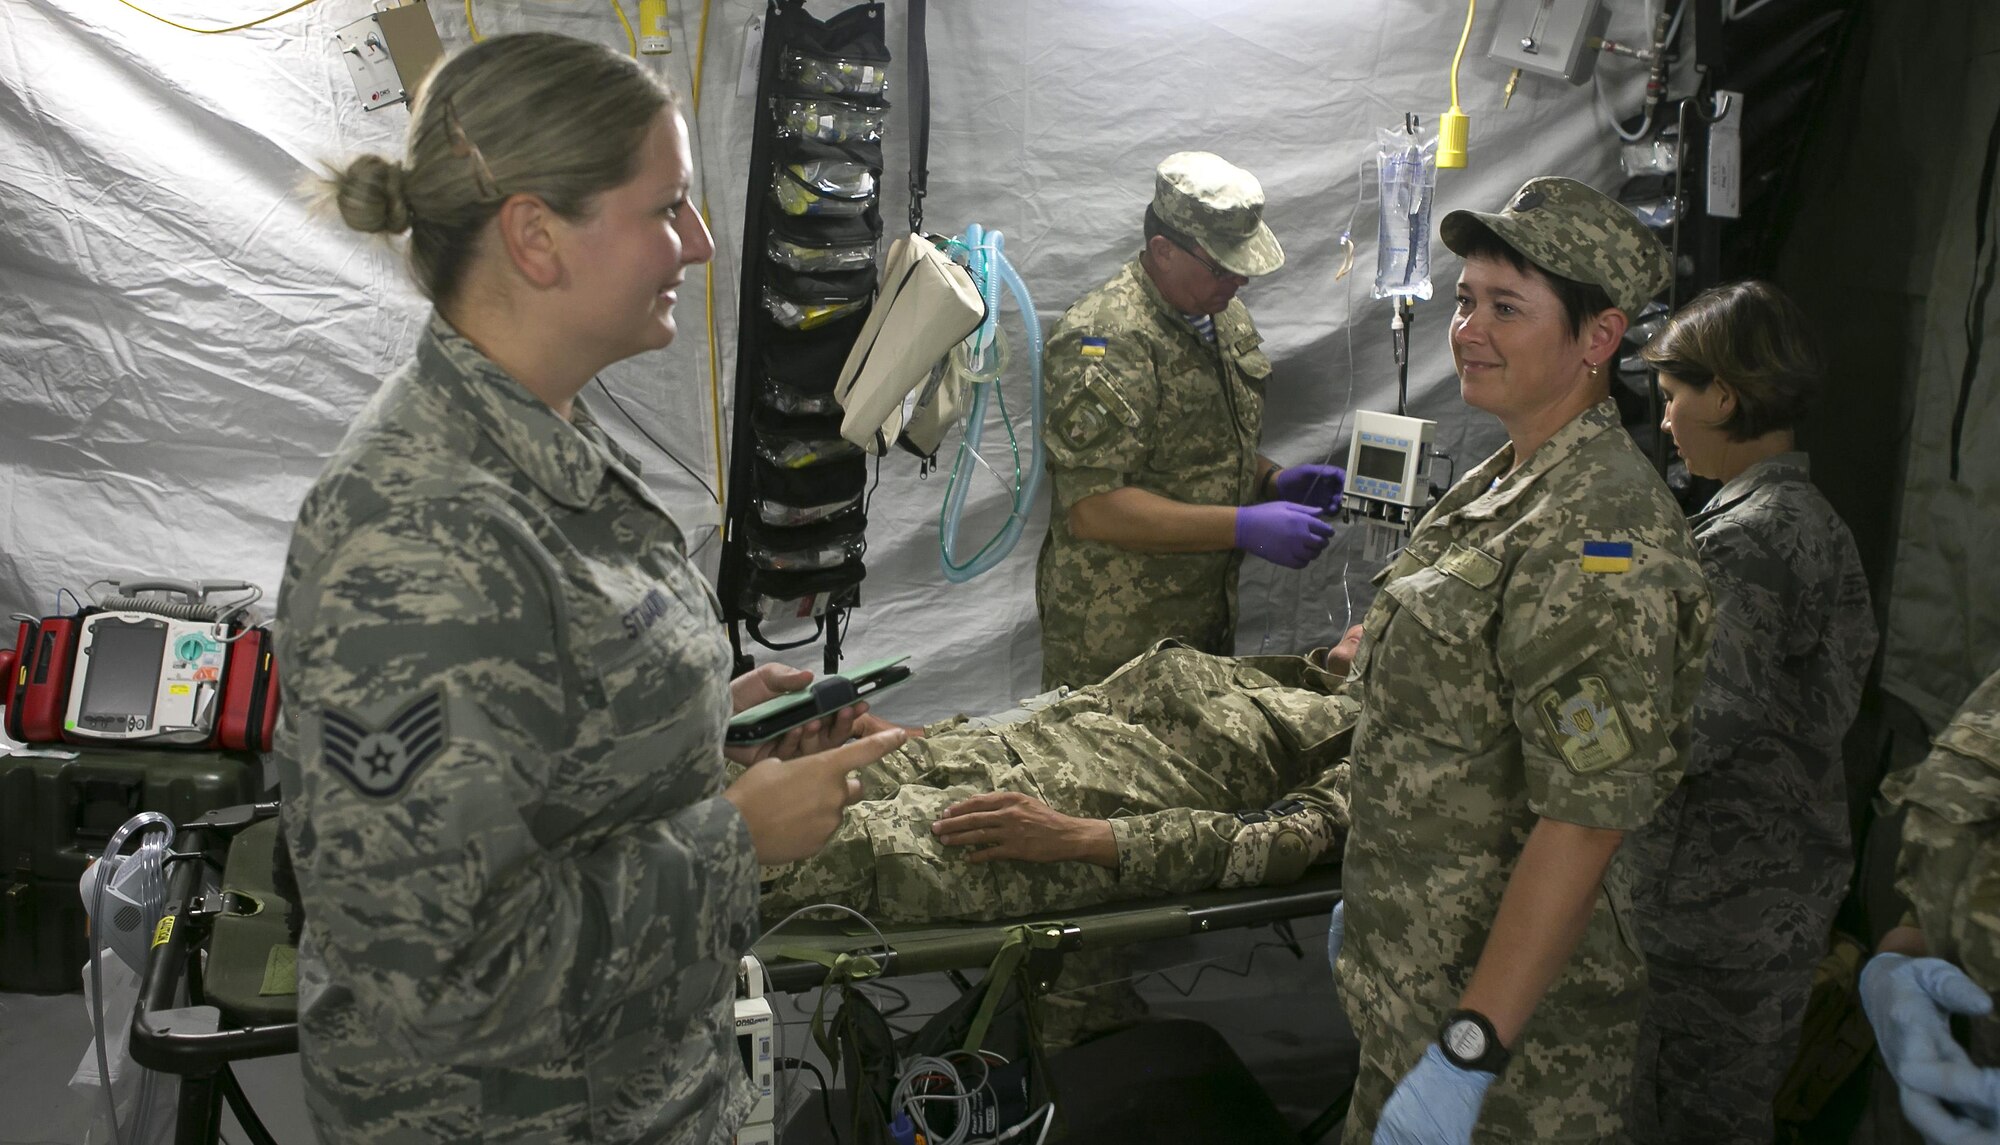 Staff Sgt. Anastasia Stuart, assigned to the 6th Medical Support Squadron, translates instructions about the medical equipment in Zhytomyr, Ukraine, Aug 18, 2015. Stuart was selected by the Language Enabled Airman Program to interpret and translate between the U.S Air Force Airmen and the Ukrainian soldiers. (Courtesy photo) 